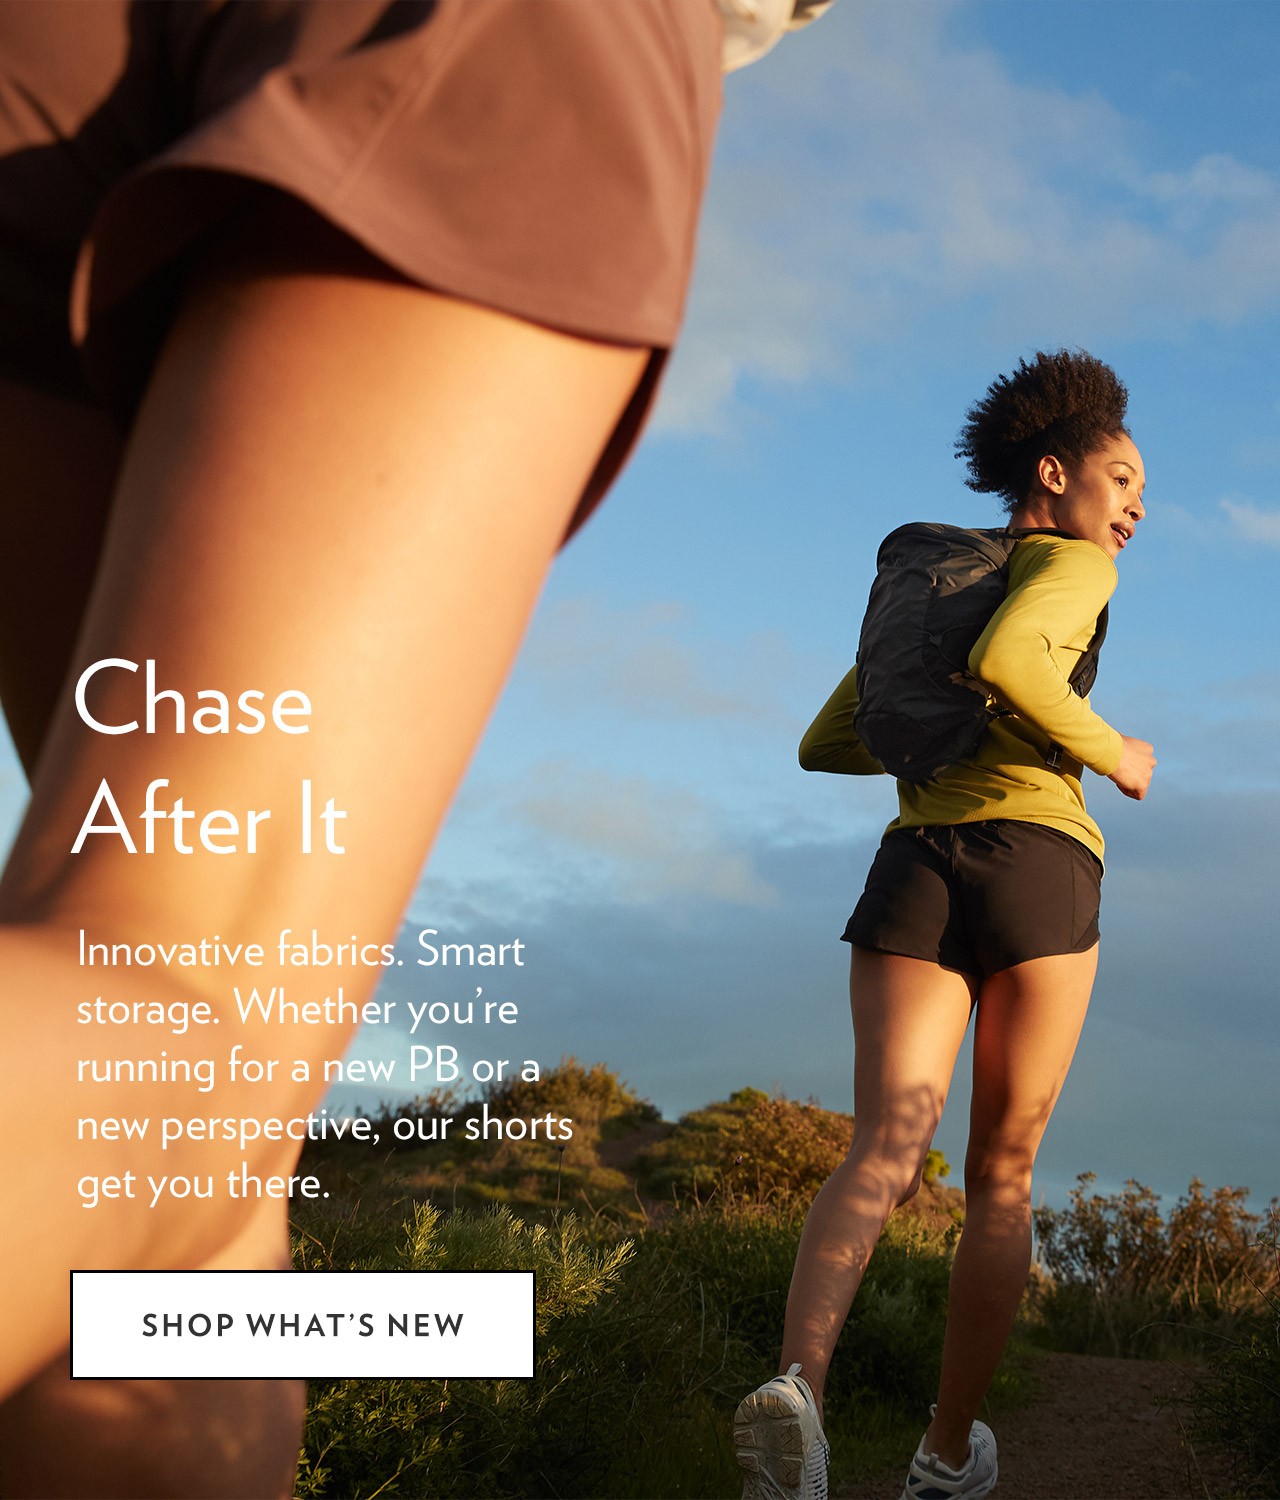 Chase After It - SHOP WHAT'S NEW